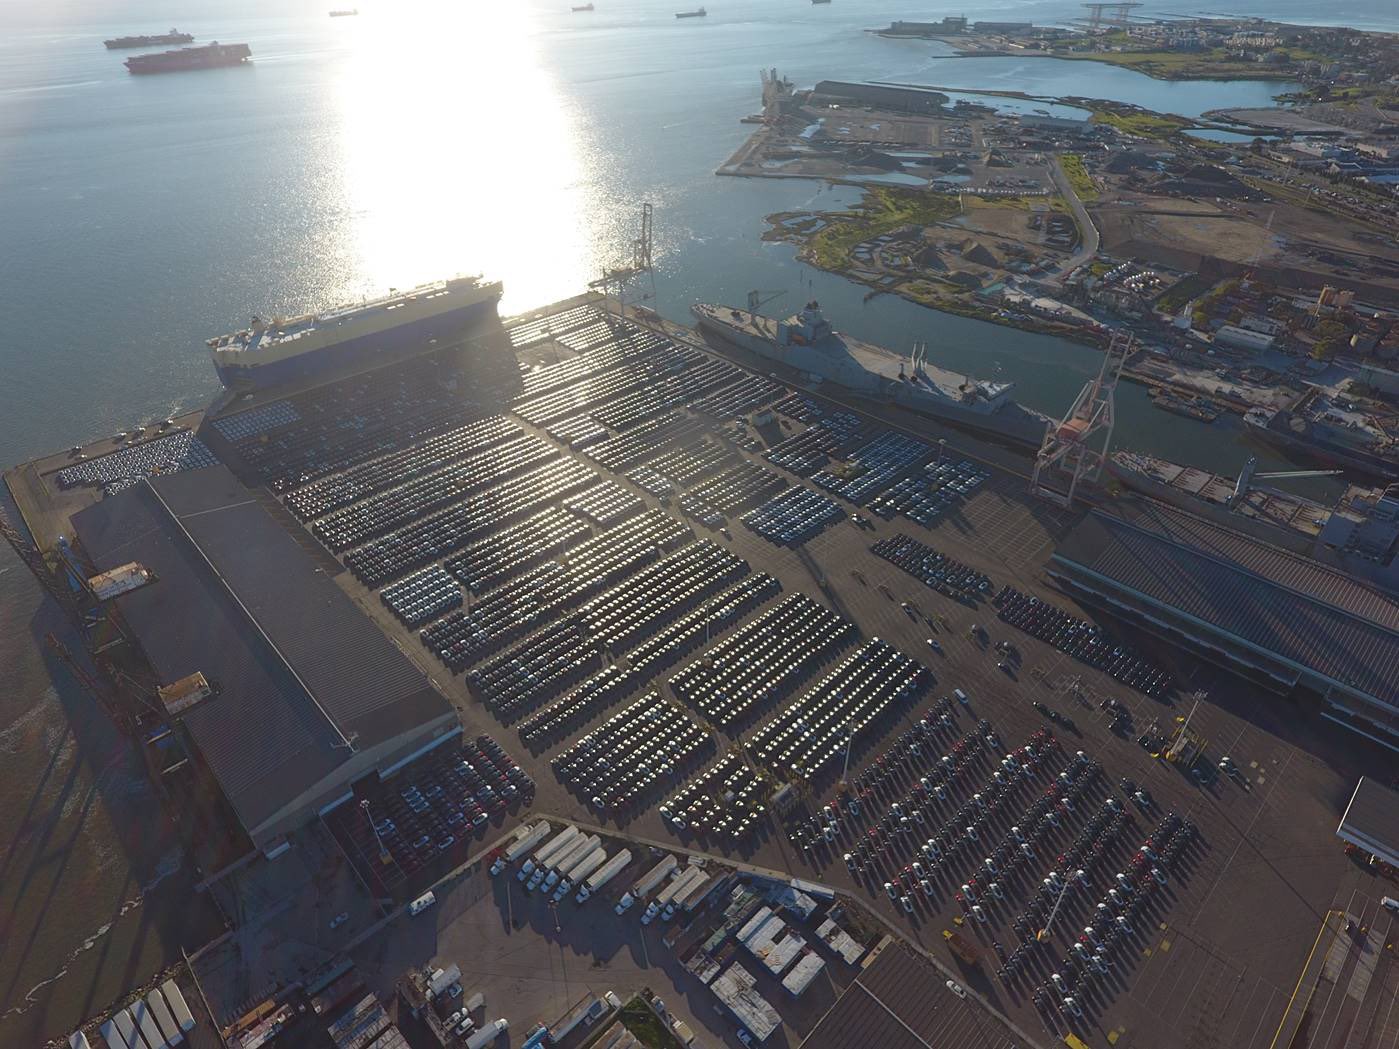 4,000 Tesla electric vehicles waiting at the San Francisco port to be shipped to Europe.